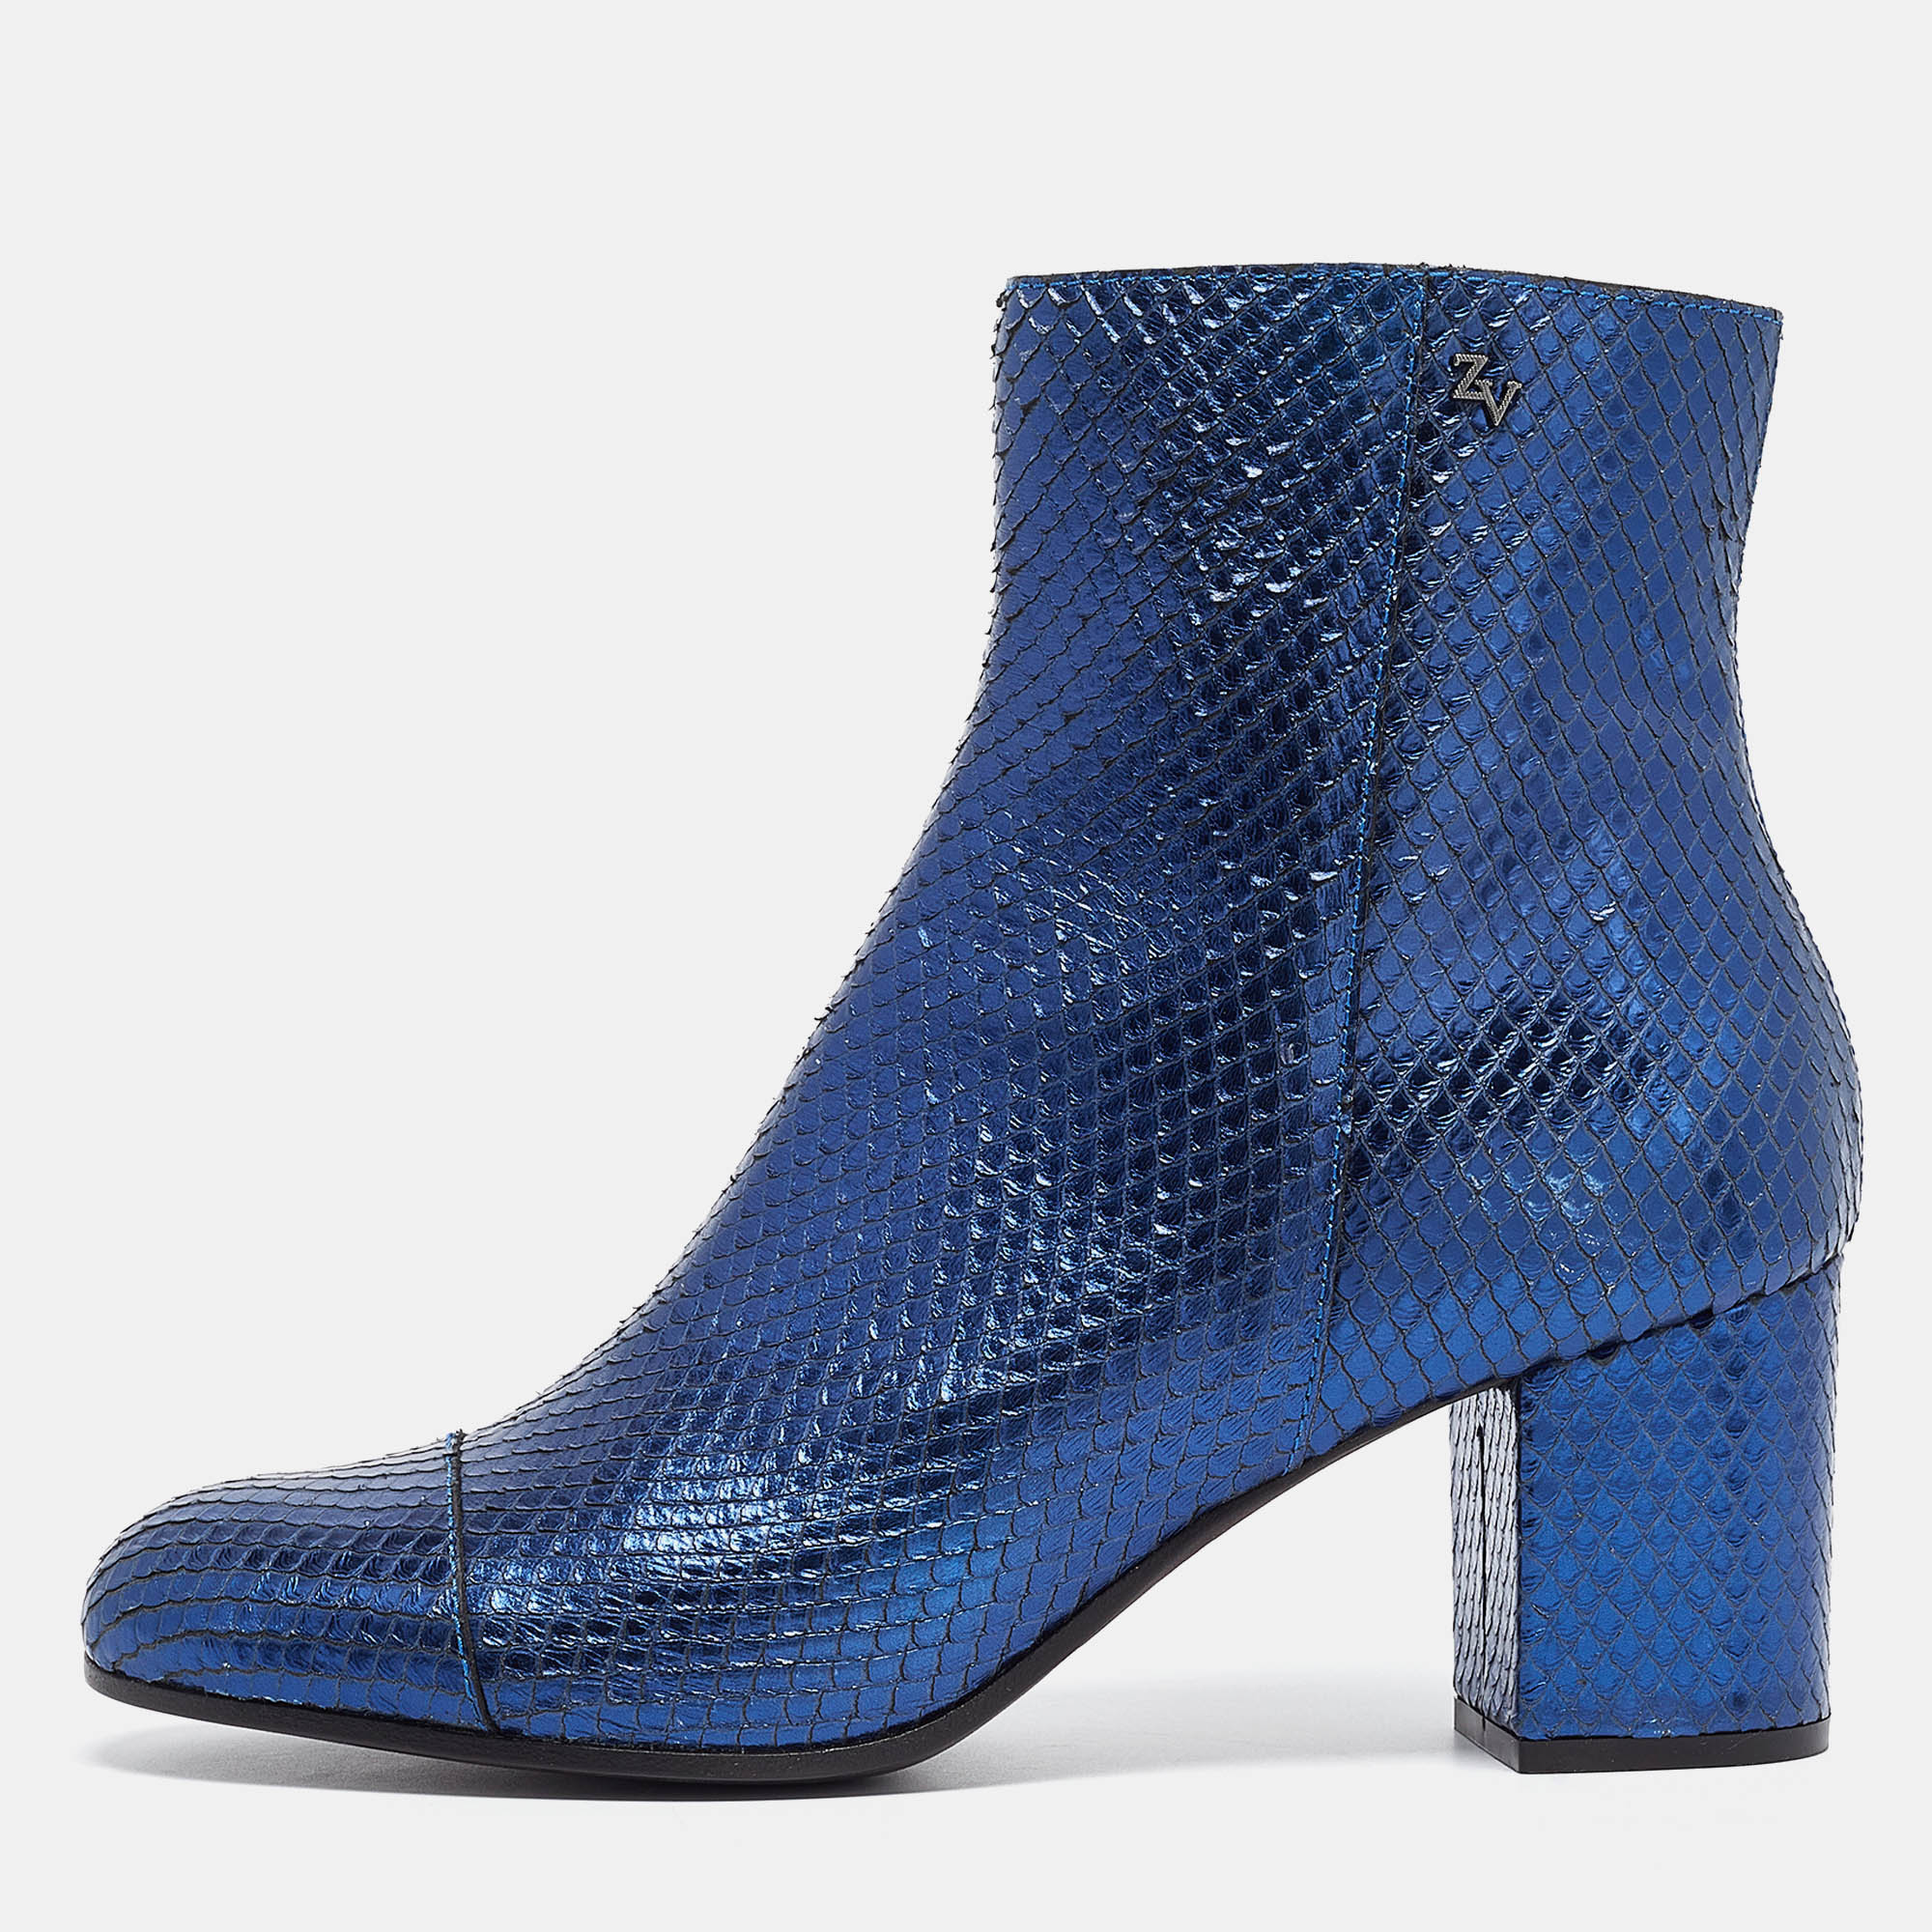 Zadig & voltaire metallic blue python embossed leather lena ankle boots size 40